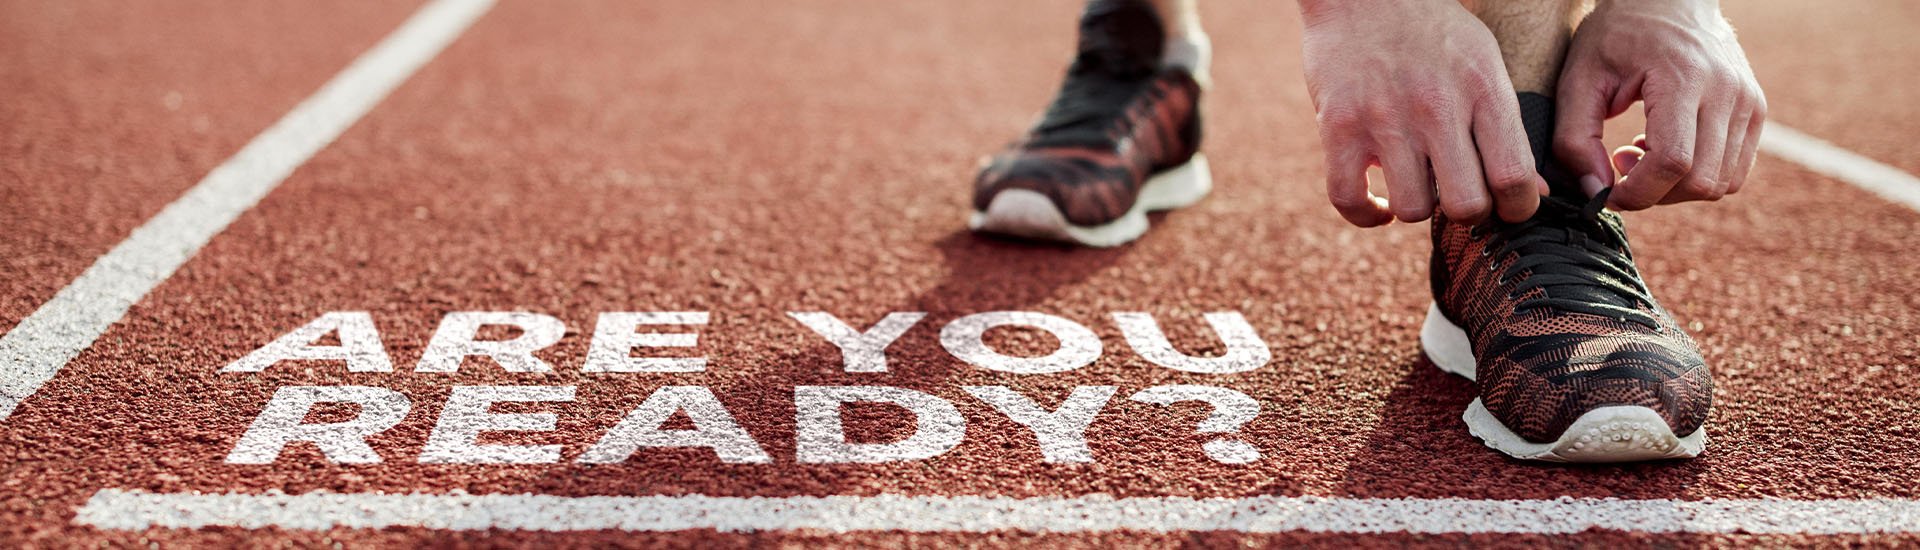 athlete-ready-to-run-with-are-you-ready-message